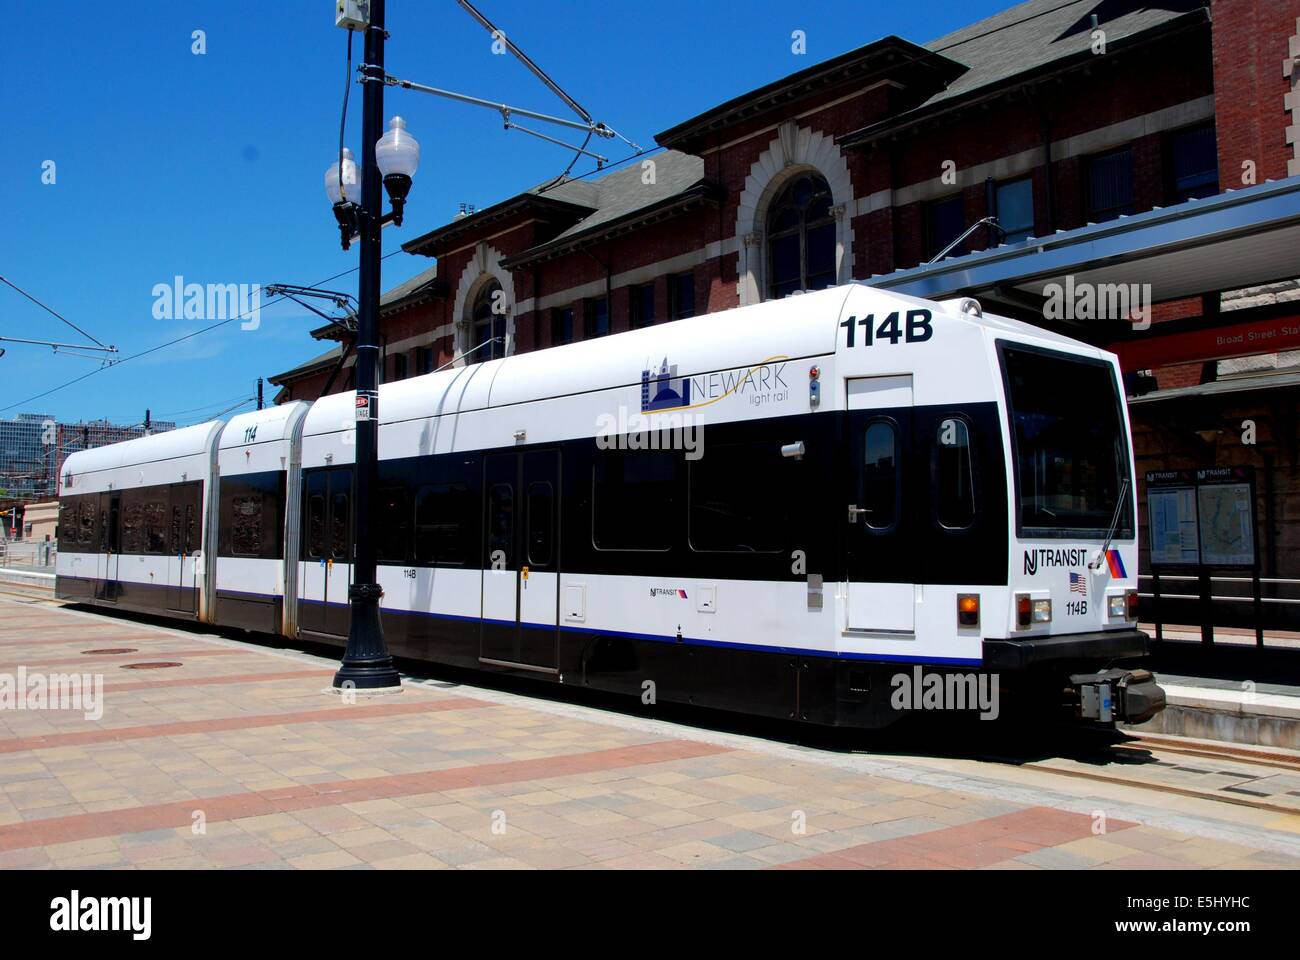 NEWARK, NEW JERSEY: One of the new light rail trains stopped at the NJ Transit Broad Street Station Stock Photo